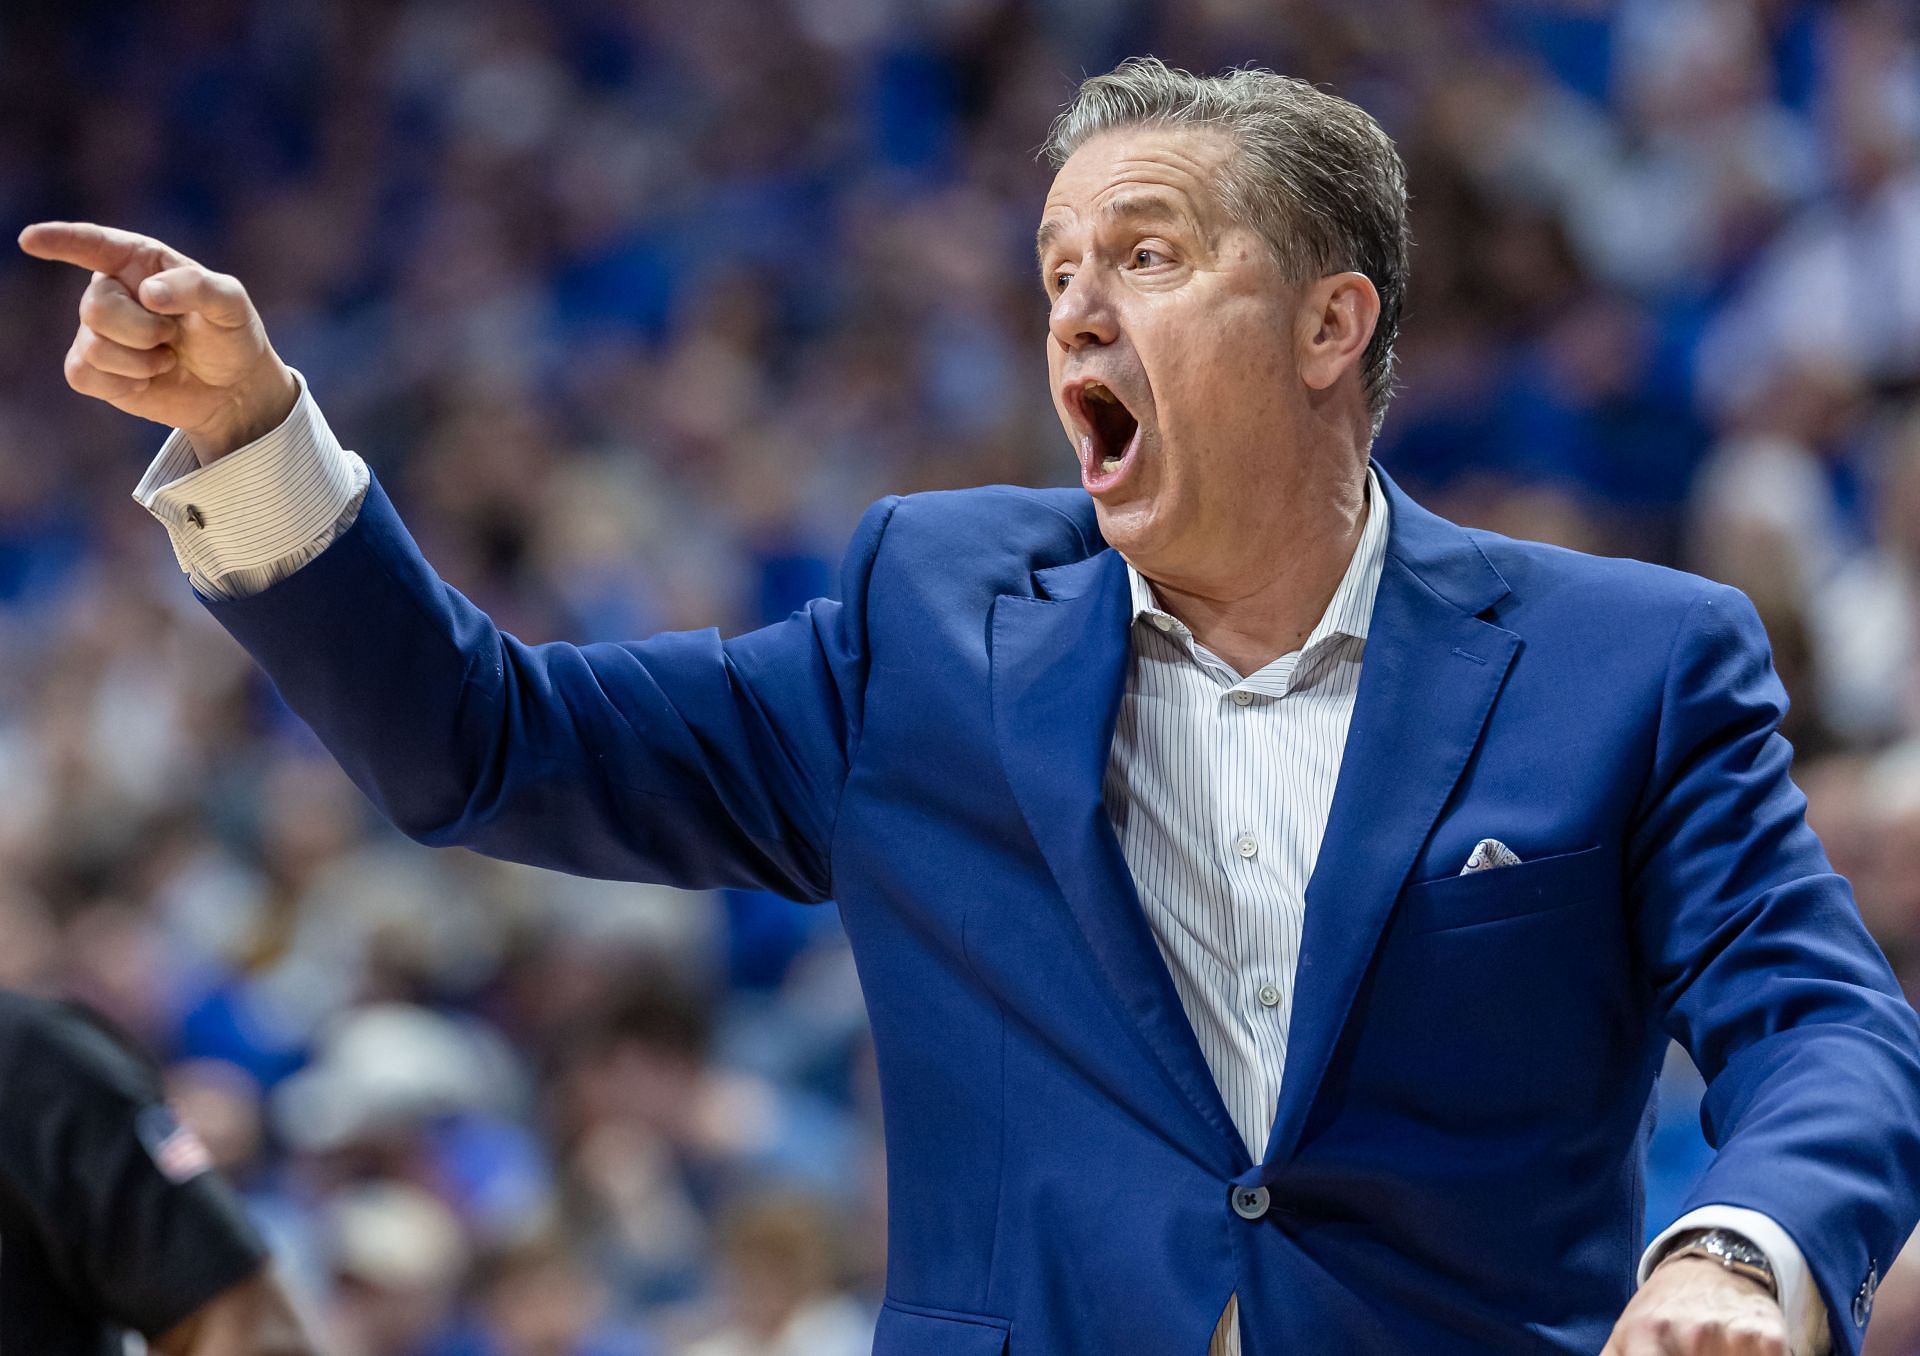 Calipari shouts instructions from the bench..